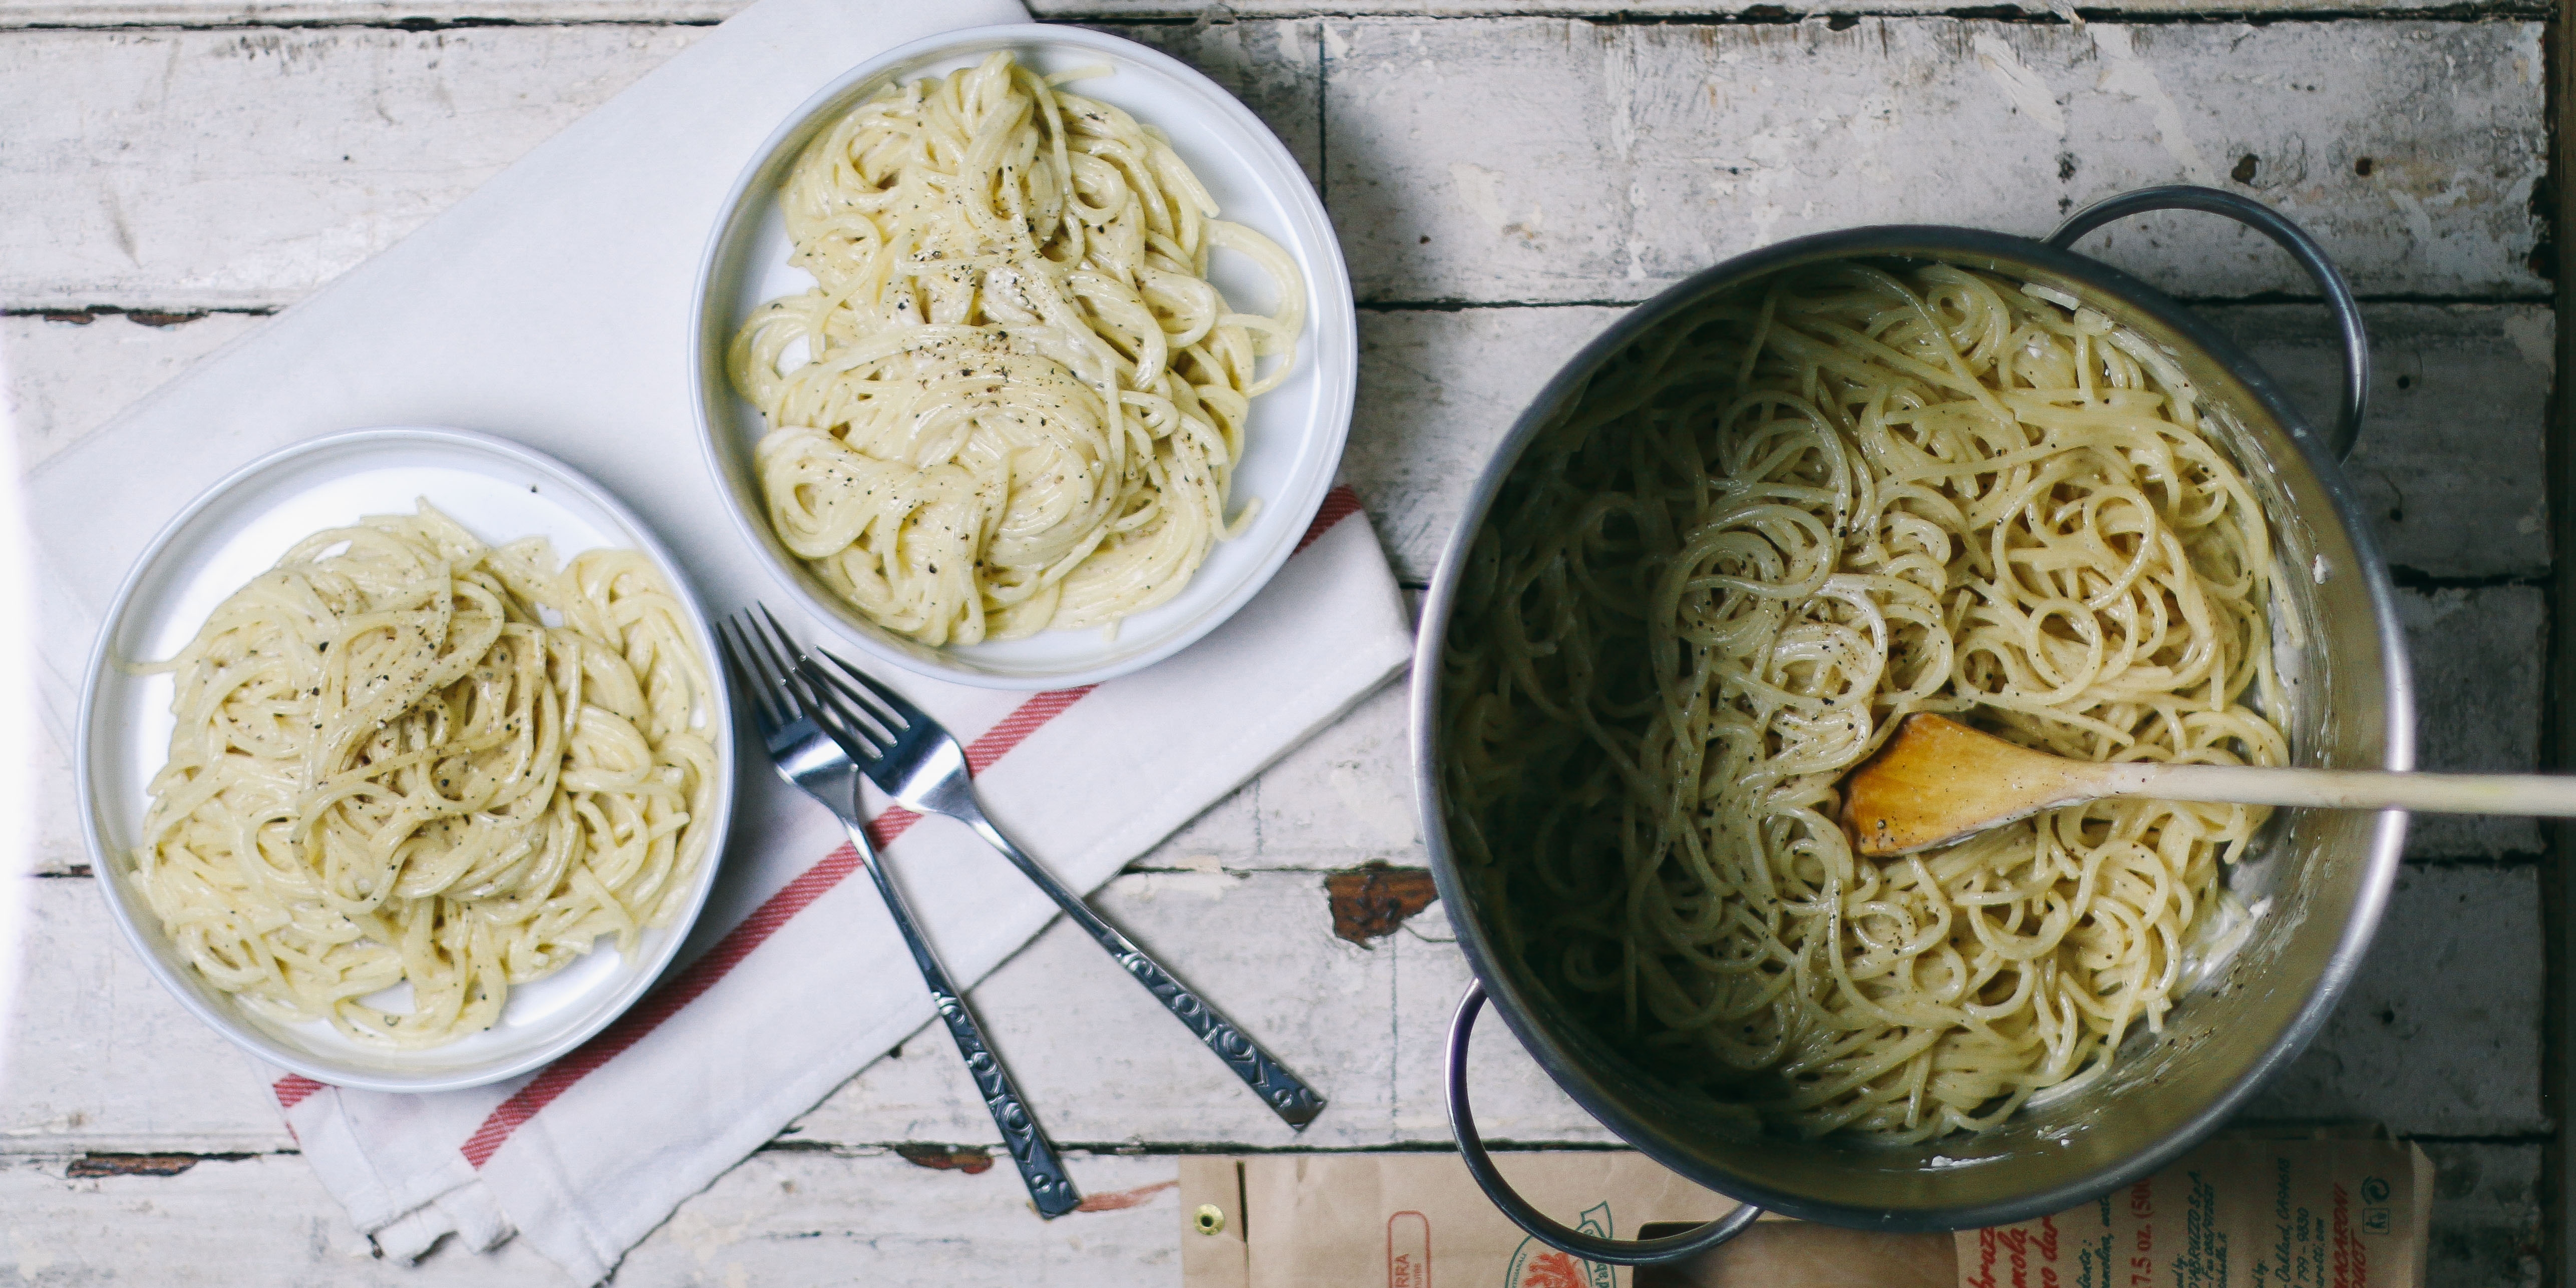 Mom's Cacio e Pepe with Feta Cheese | I Will Not Eat Oysters